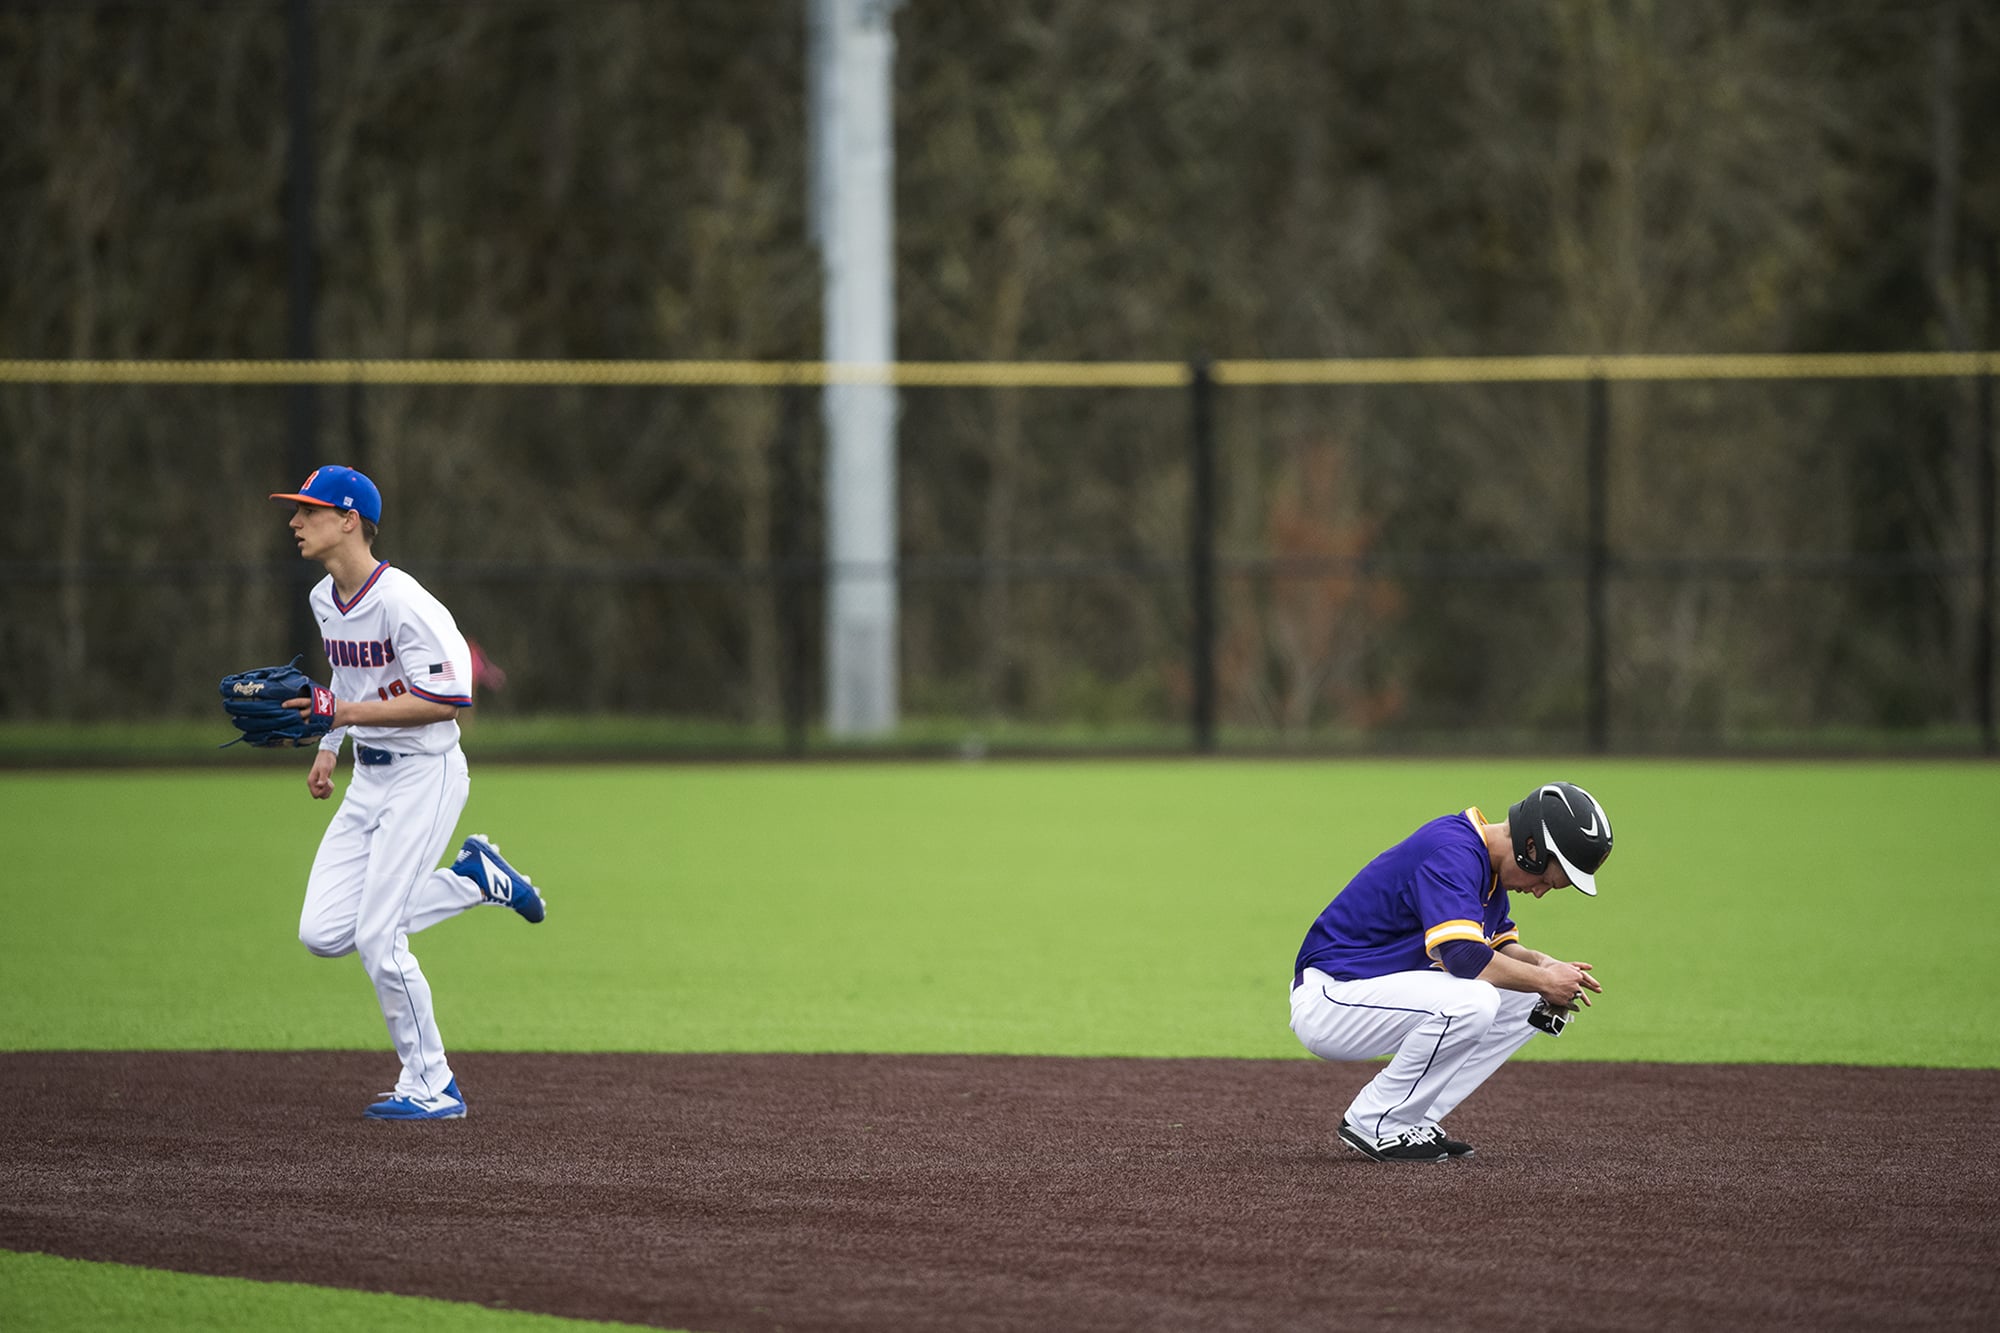 Columbia River's Cole Delich reacts to being called out at Second Base during a game against Ridgefield at the Ridgefield Outdoor Recreation Center on Tuesday night, April 16, 2019.